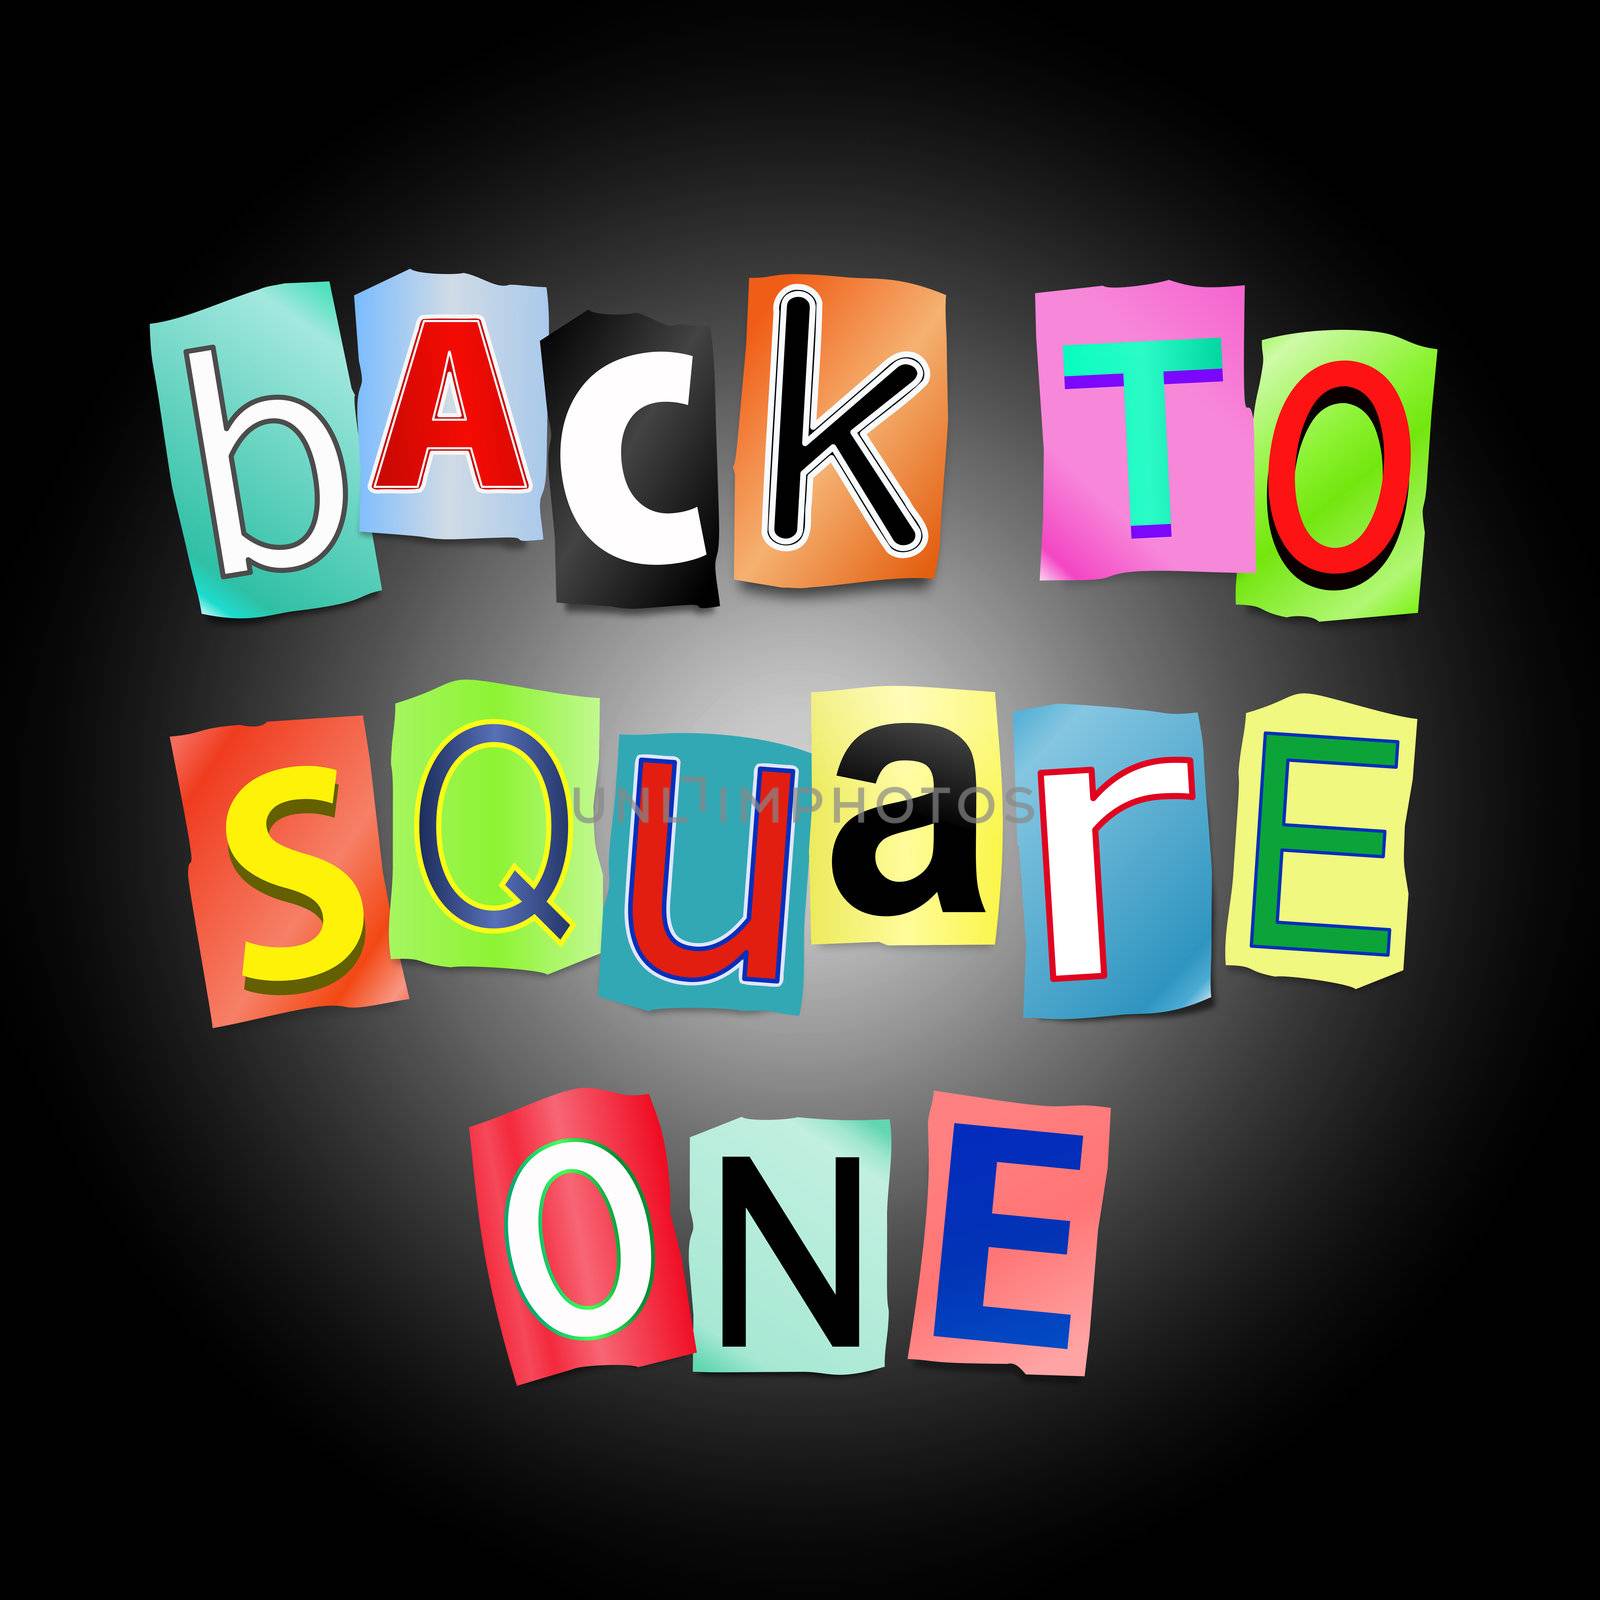 Back to square one. by 72soul